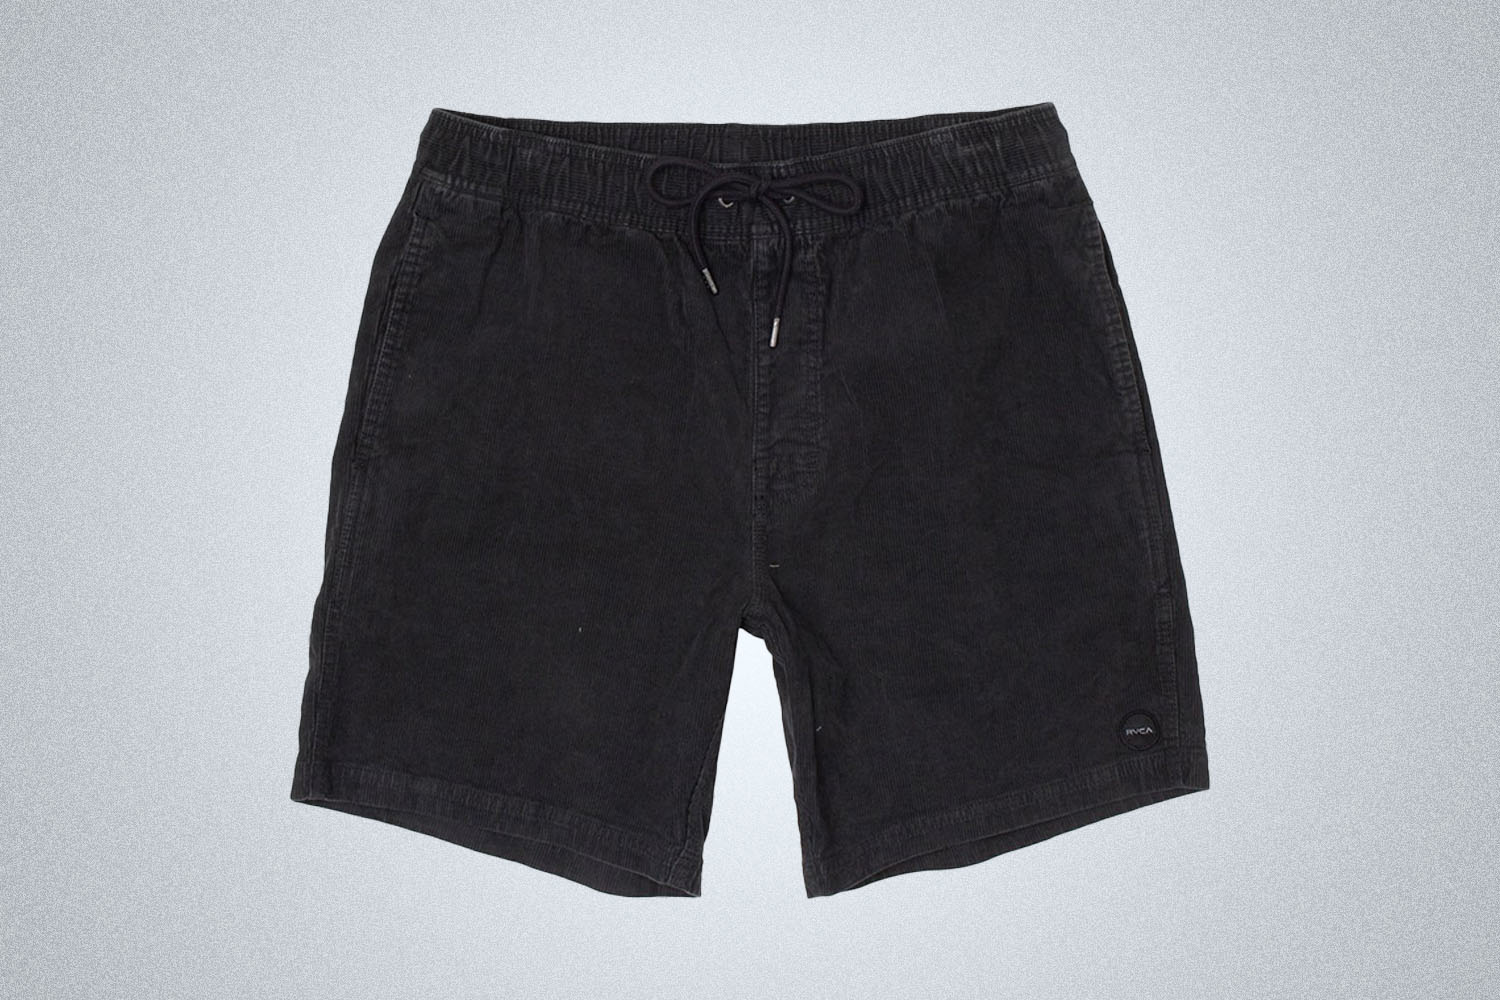 a pair of black RVCA corduroy shorts on a grey background